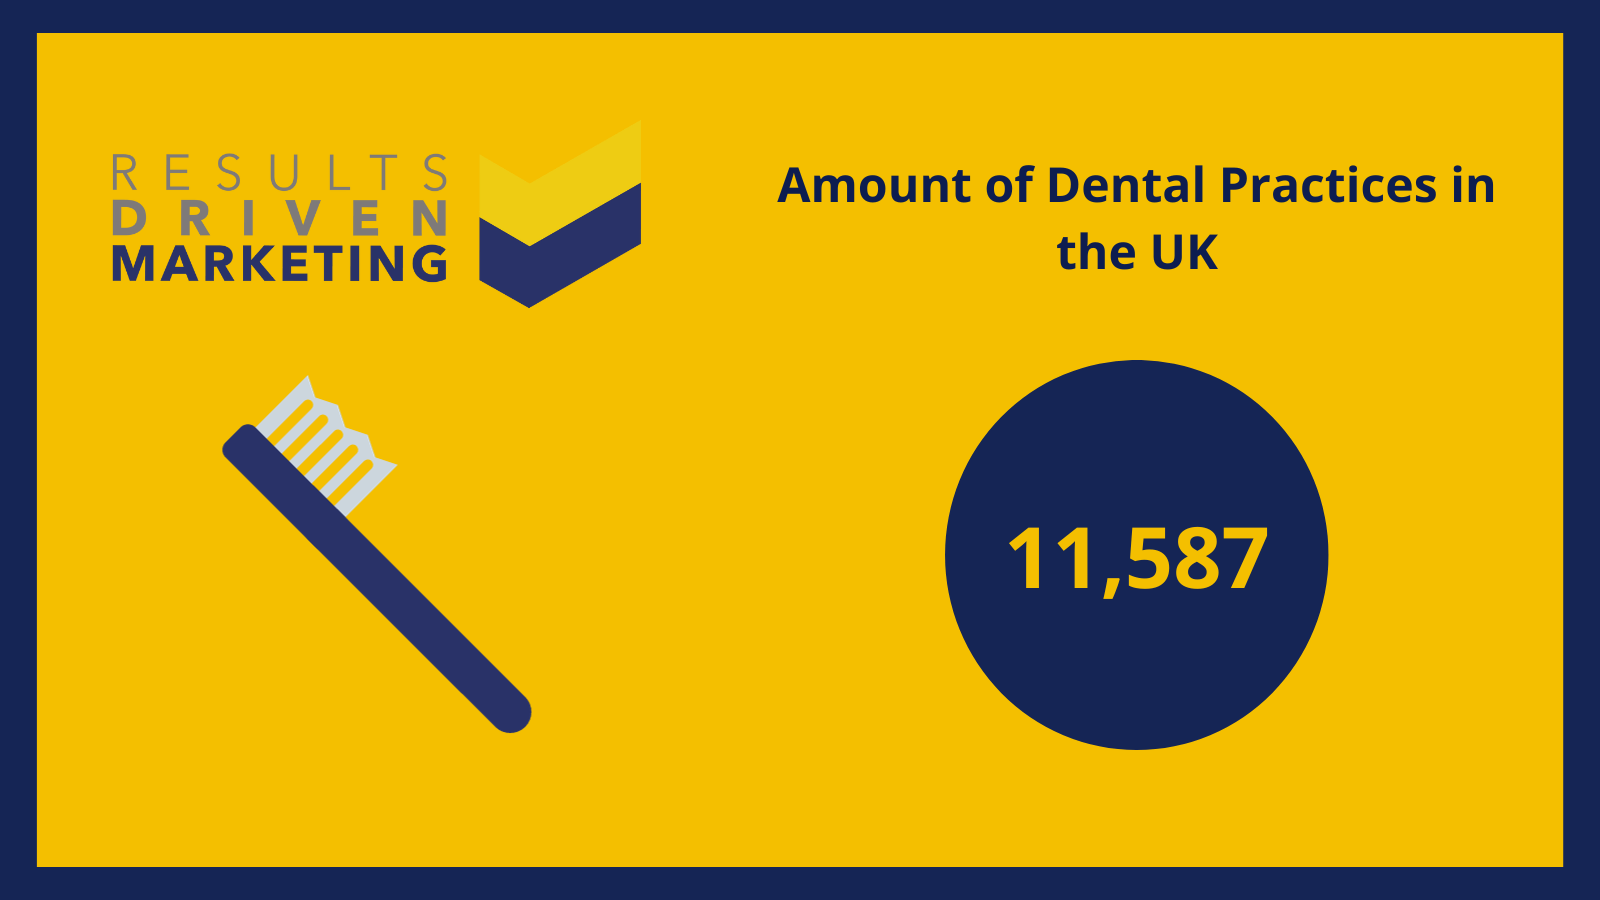 How Many Dental Practices in the UK?